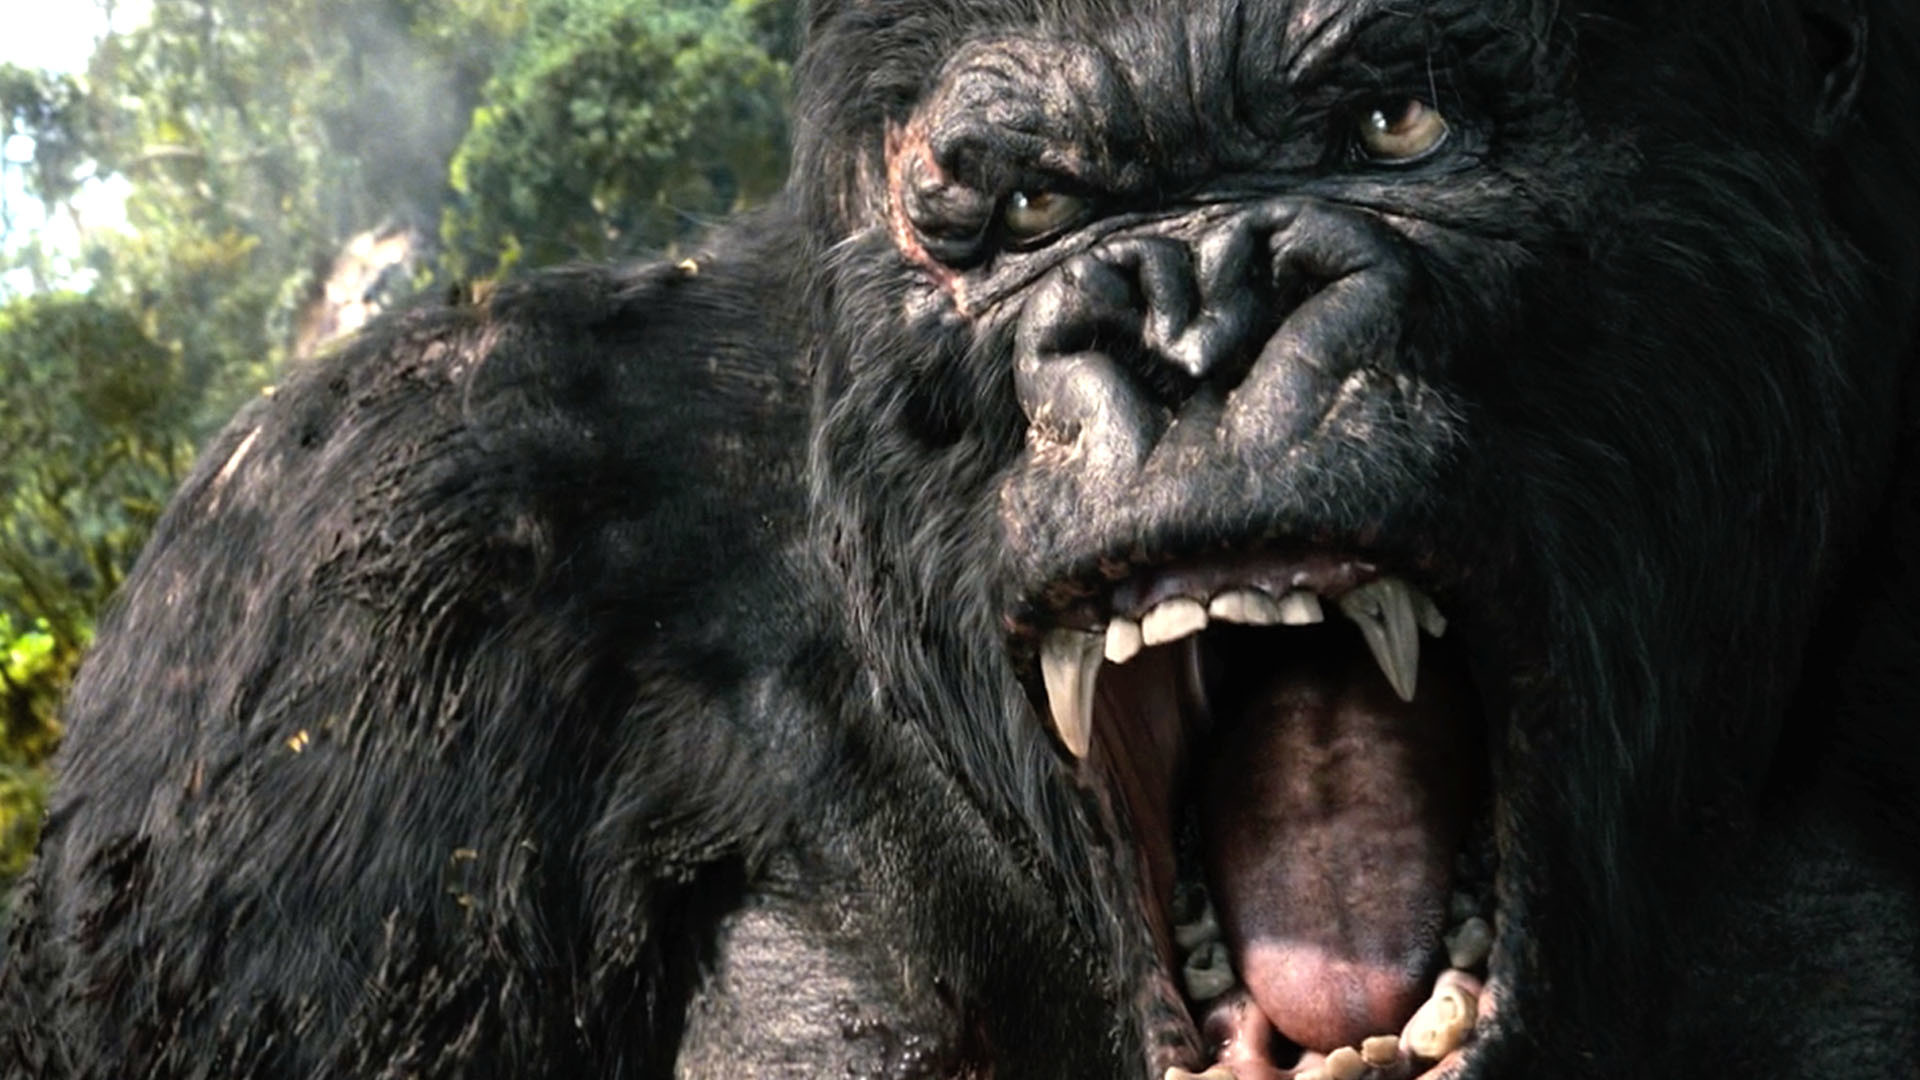 king kong wallpaper,facial expression,snout,common chimpanzee,tooth,mouth